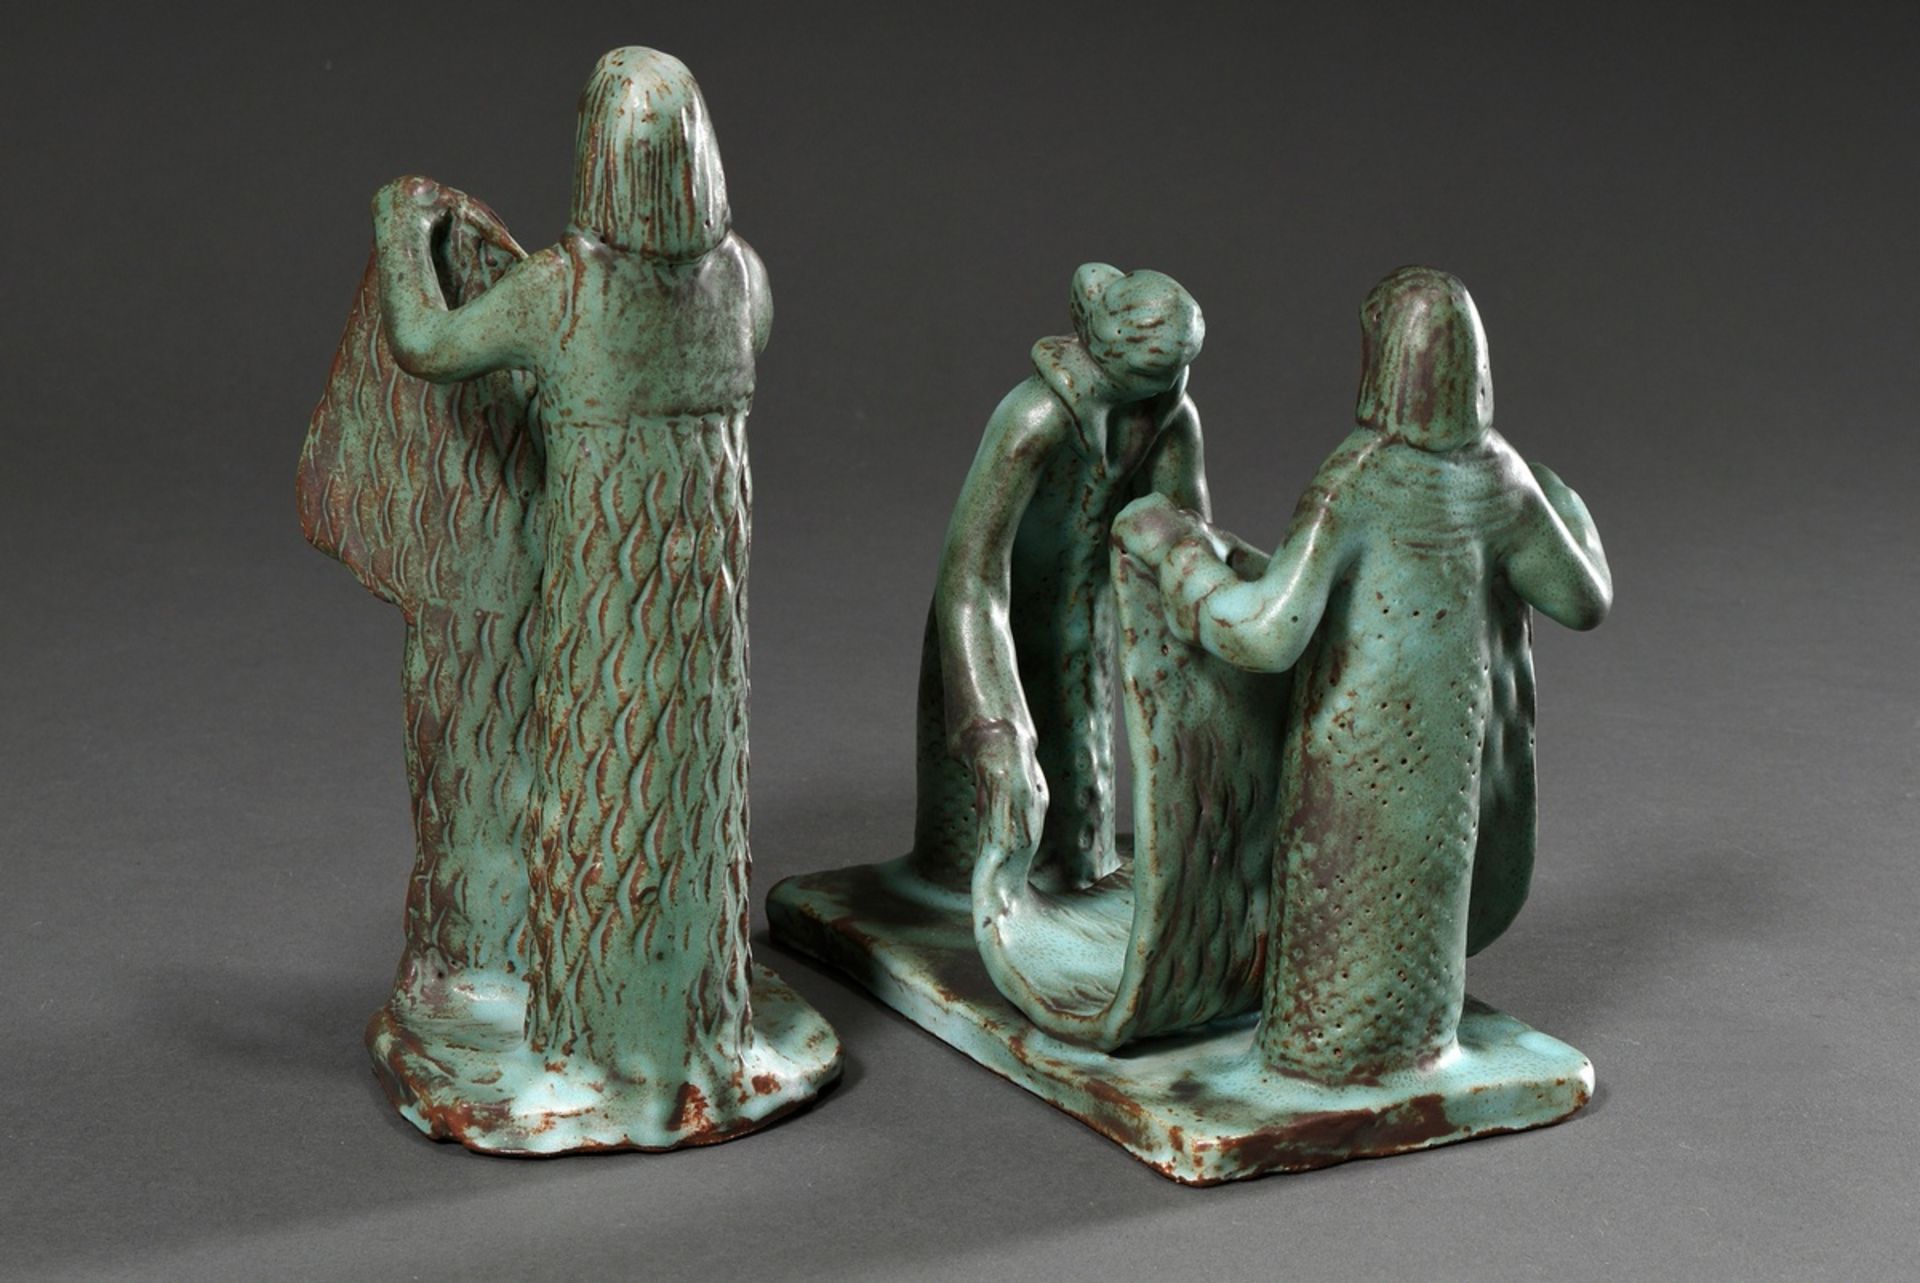 2 Various Maetzel, Monika (1917-2010) figure groups "Woman with robe" and "Two women with blanket", - Image 3 of 4